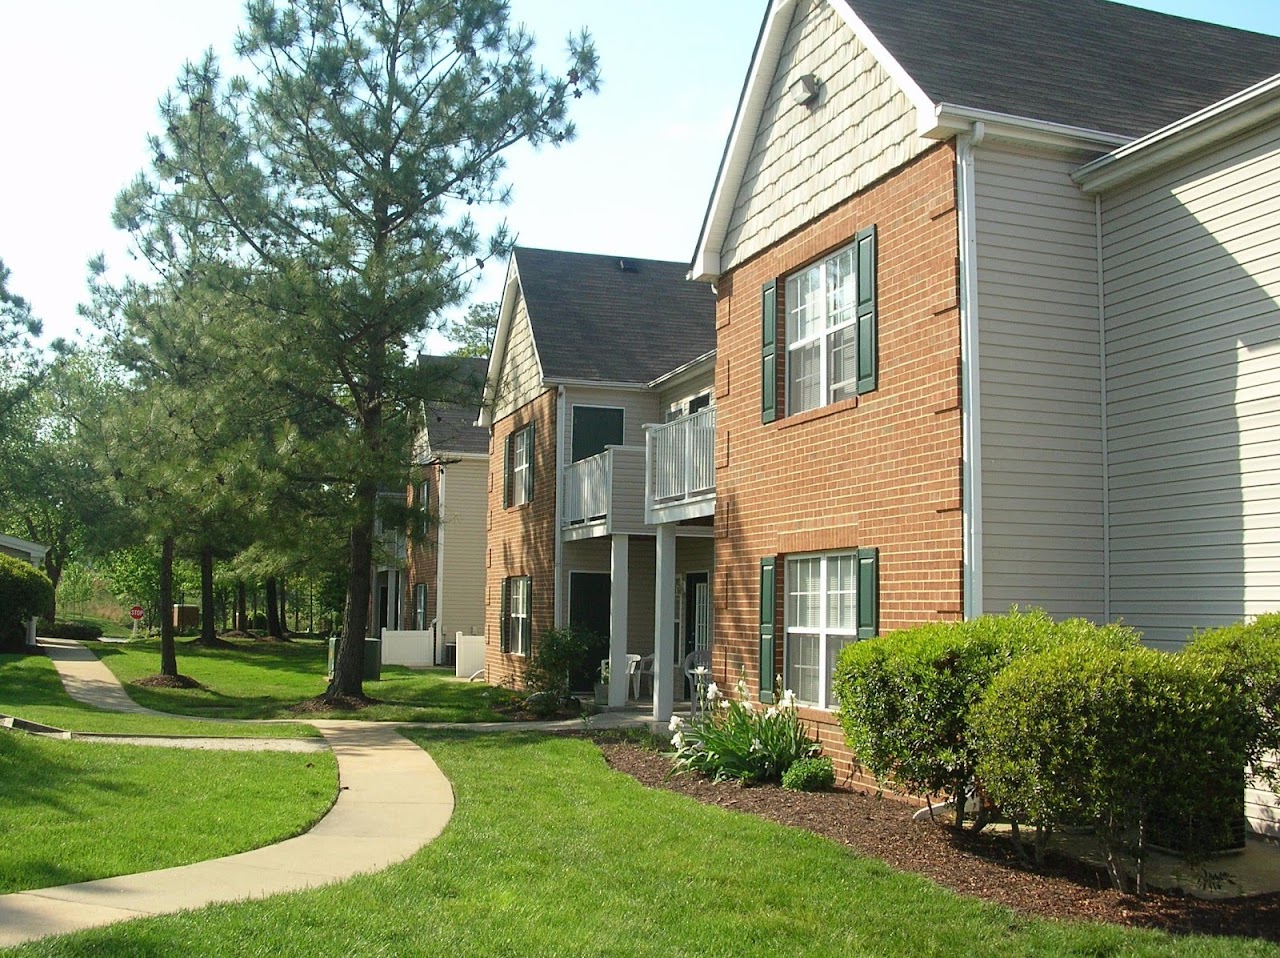 Photo of ARBOR LAKE. Affordable housing located at 6706 ARBOR LAKE DR CHESTER, VA 23831